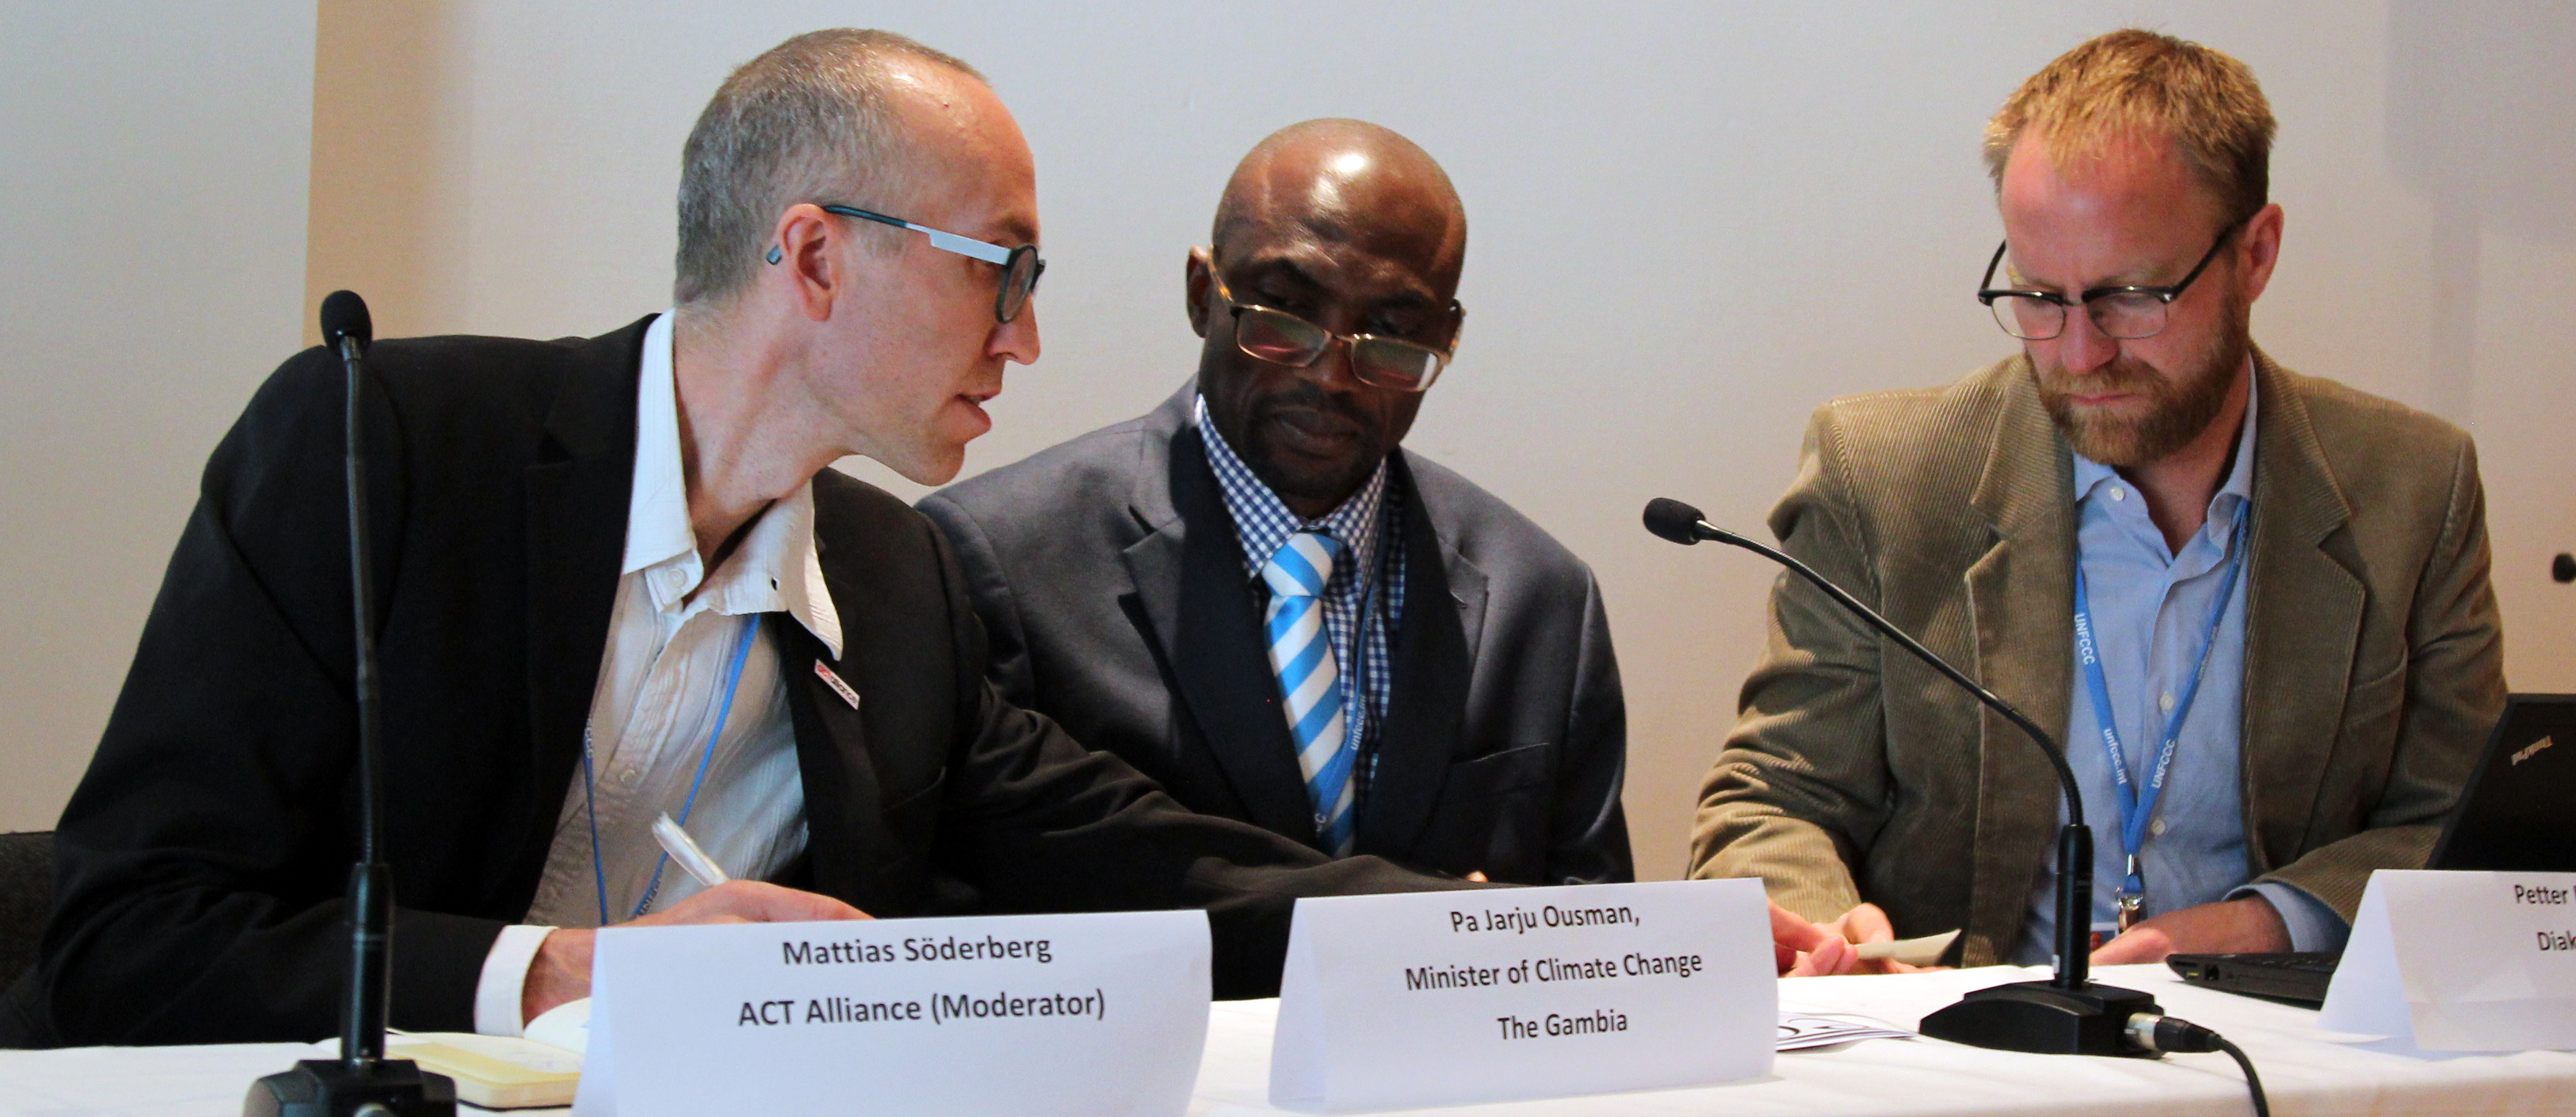 From R-L: Petter Lydén; Pa Ousman Jarju, Minister of Climate Change, Water and Wildlife, the Gambia; Mattias Söderberg, ACT Alliance. Photo: IISD